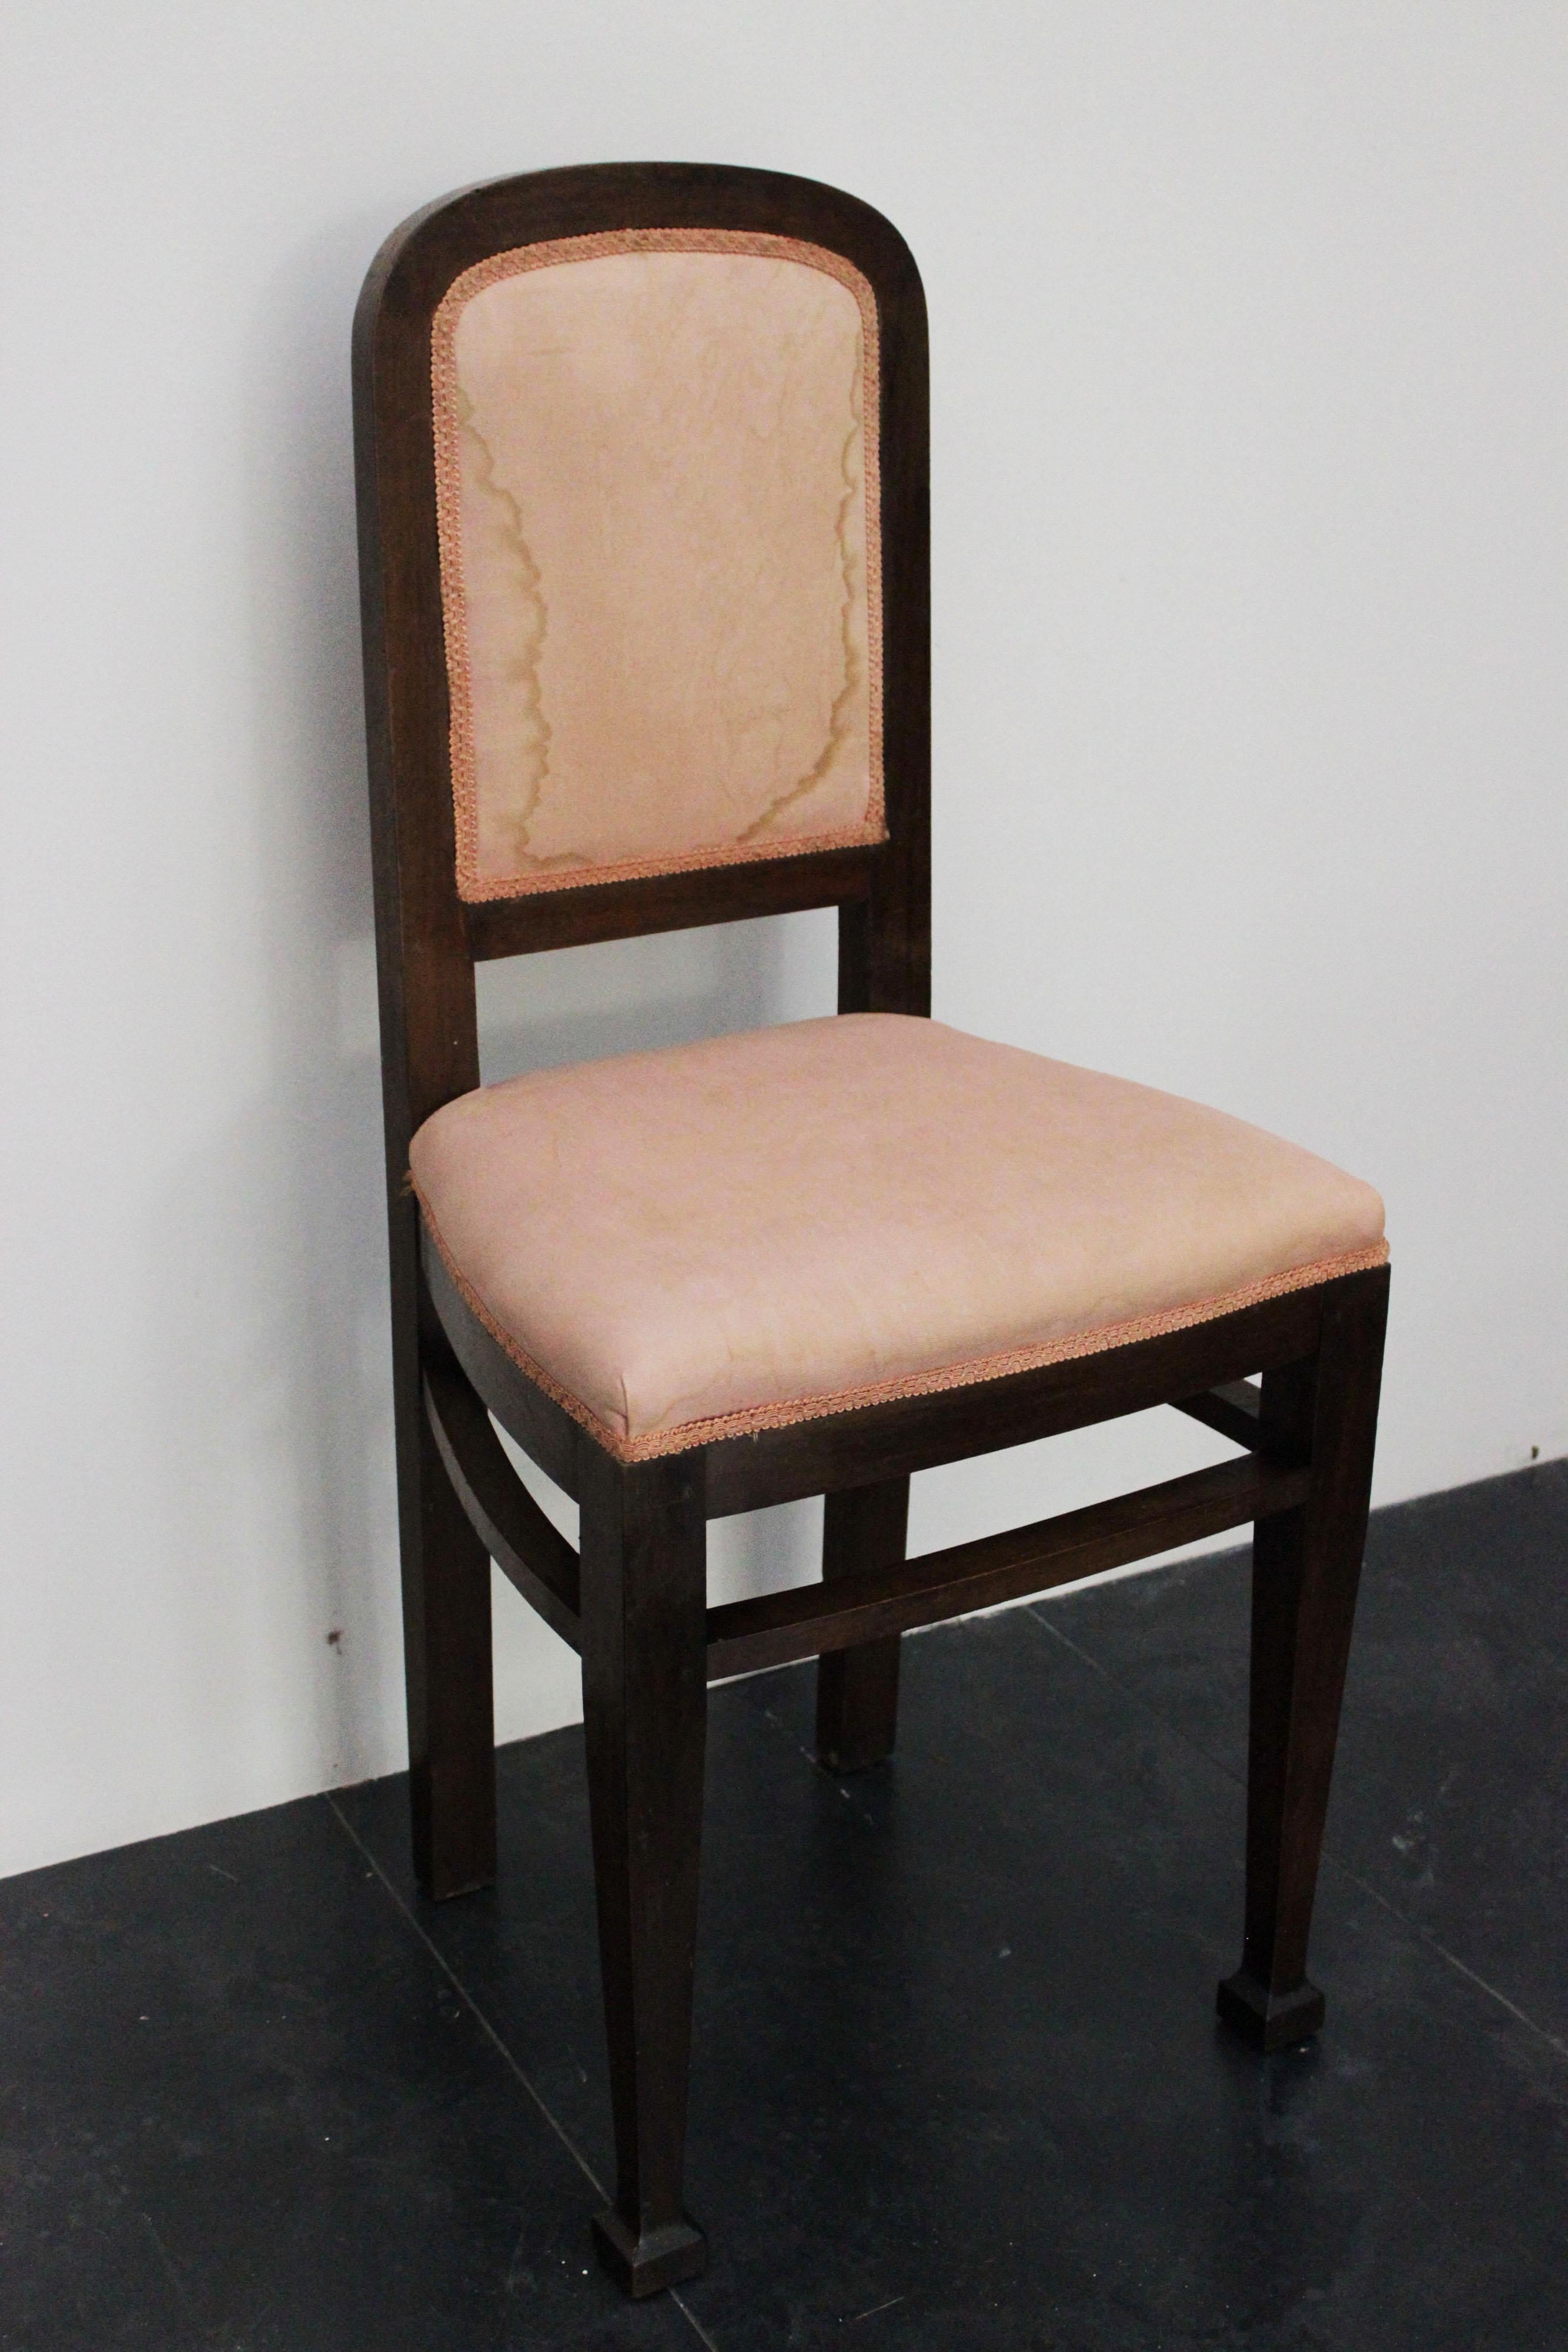 2 art deco walnut chairs, defect in the silk upholstery.
Packaging with bubble wrap and cardboard boxes is included. If the wooden packaging is needed (fumigated crates or boxes) for US and International Shipping, it's required a separate cost (will